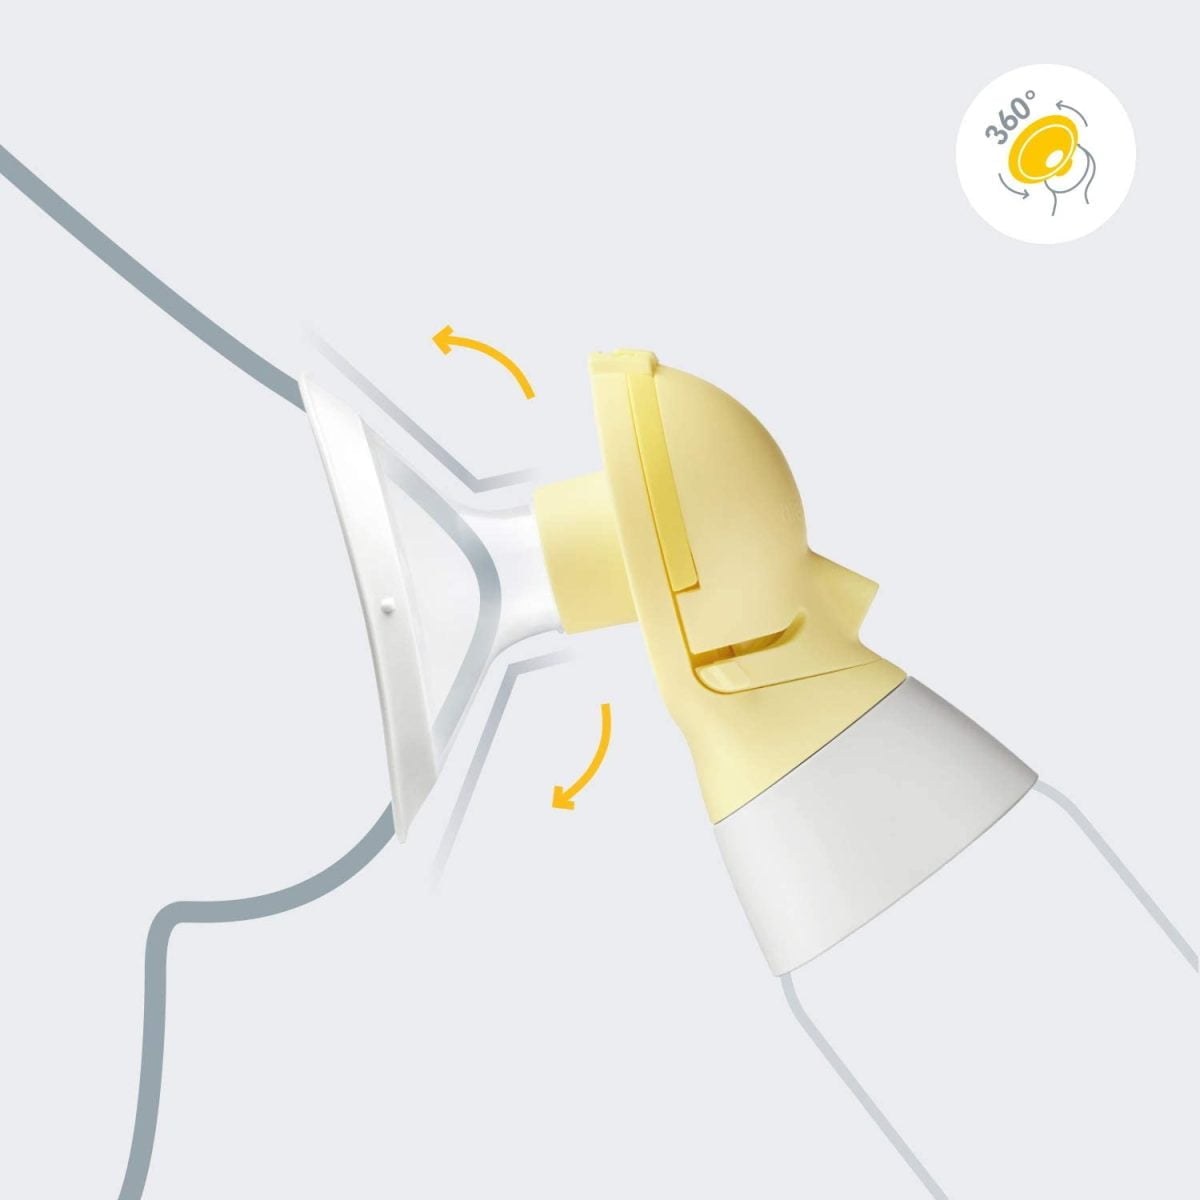 51Abehez Fl. Ac Sl1500 Medela &Lt;H1 Class=&Quot;Mtop0&Quot;&Gt;Medela Swing Flex Breast Pump&Lt;/H1&Gt; Https://Www.youtube.com/Watch?V=Cz6Aqdjjbdw Medela Swingflex Single Electric Breast Pump Is Infused With Patented And Research-Based 2-Phase Expression Technology. Through Research, Medela Has Learned That There Are Two Distinct Phases Of How Babies Breastfeed. The First Phase, Known As The Stimulation Phase Is When The Baby First Goes To The Breast And Sucks Fast To Initiate The Milk Flow. The Second Phase Of Expression Occurs After Milk Flow Or Let-Down Begins. During This Phase, The Baby Breastfeeds At A Slower Suck Rate For Continued Milk Flow. &Lt;Pre&Gt;&Lt;B&Gt;We Also Provide International Wholesale And Retail Shipping To All Gcc Countries: Saudi Arabia, Qatar, Oman, Kuwait, Bahrain. &Lt;/B&Gt; &Lt;B&Gt;Warranty: Pump - 1 Year, Battery - 6 Months&Lt;/B&Gt;&Lt;/Pre&Gt; Breast Pump Medela Swing Flex Breast Pump